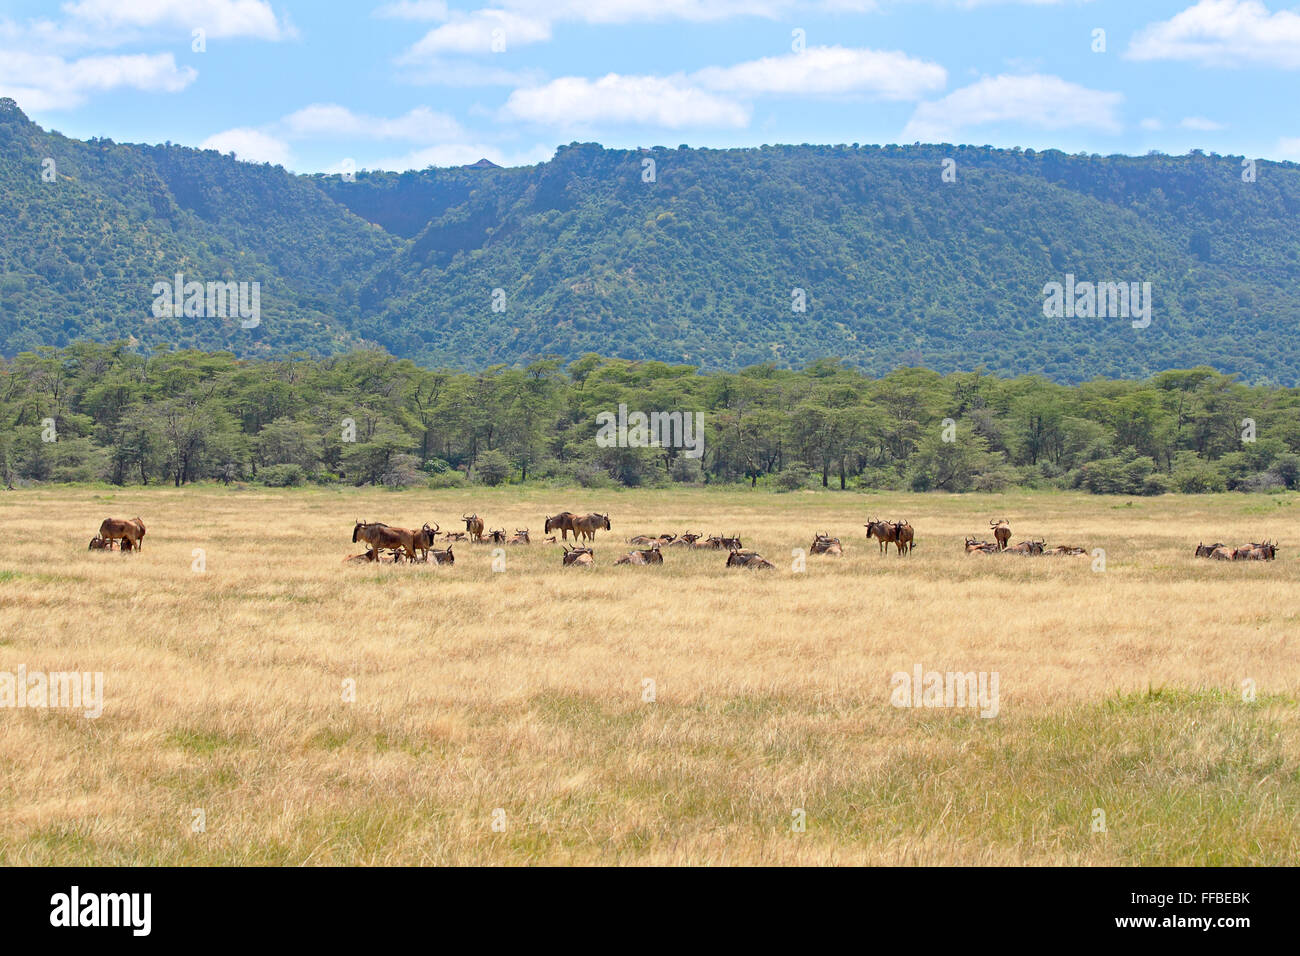 A herd of blue wildebeests, Connochaetes taurinus, near the rim of the Ngorongoro Conservation Area, Tanzania Stock Photo